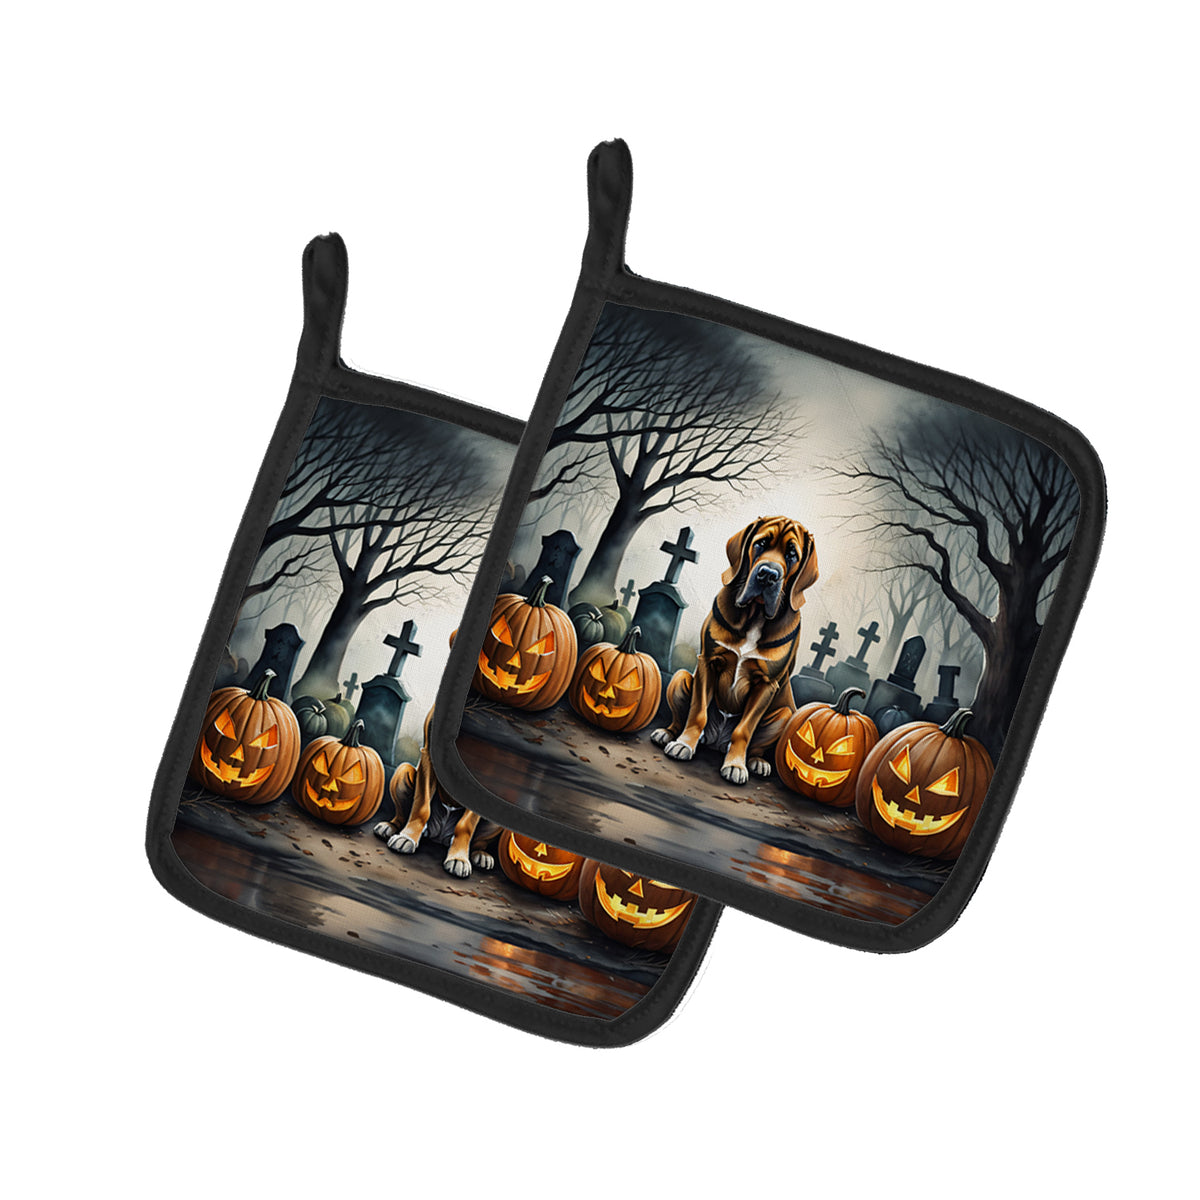 Buy this Bloodhound Spooky Halloween Pair of Pot Holders